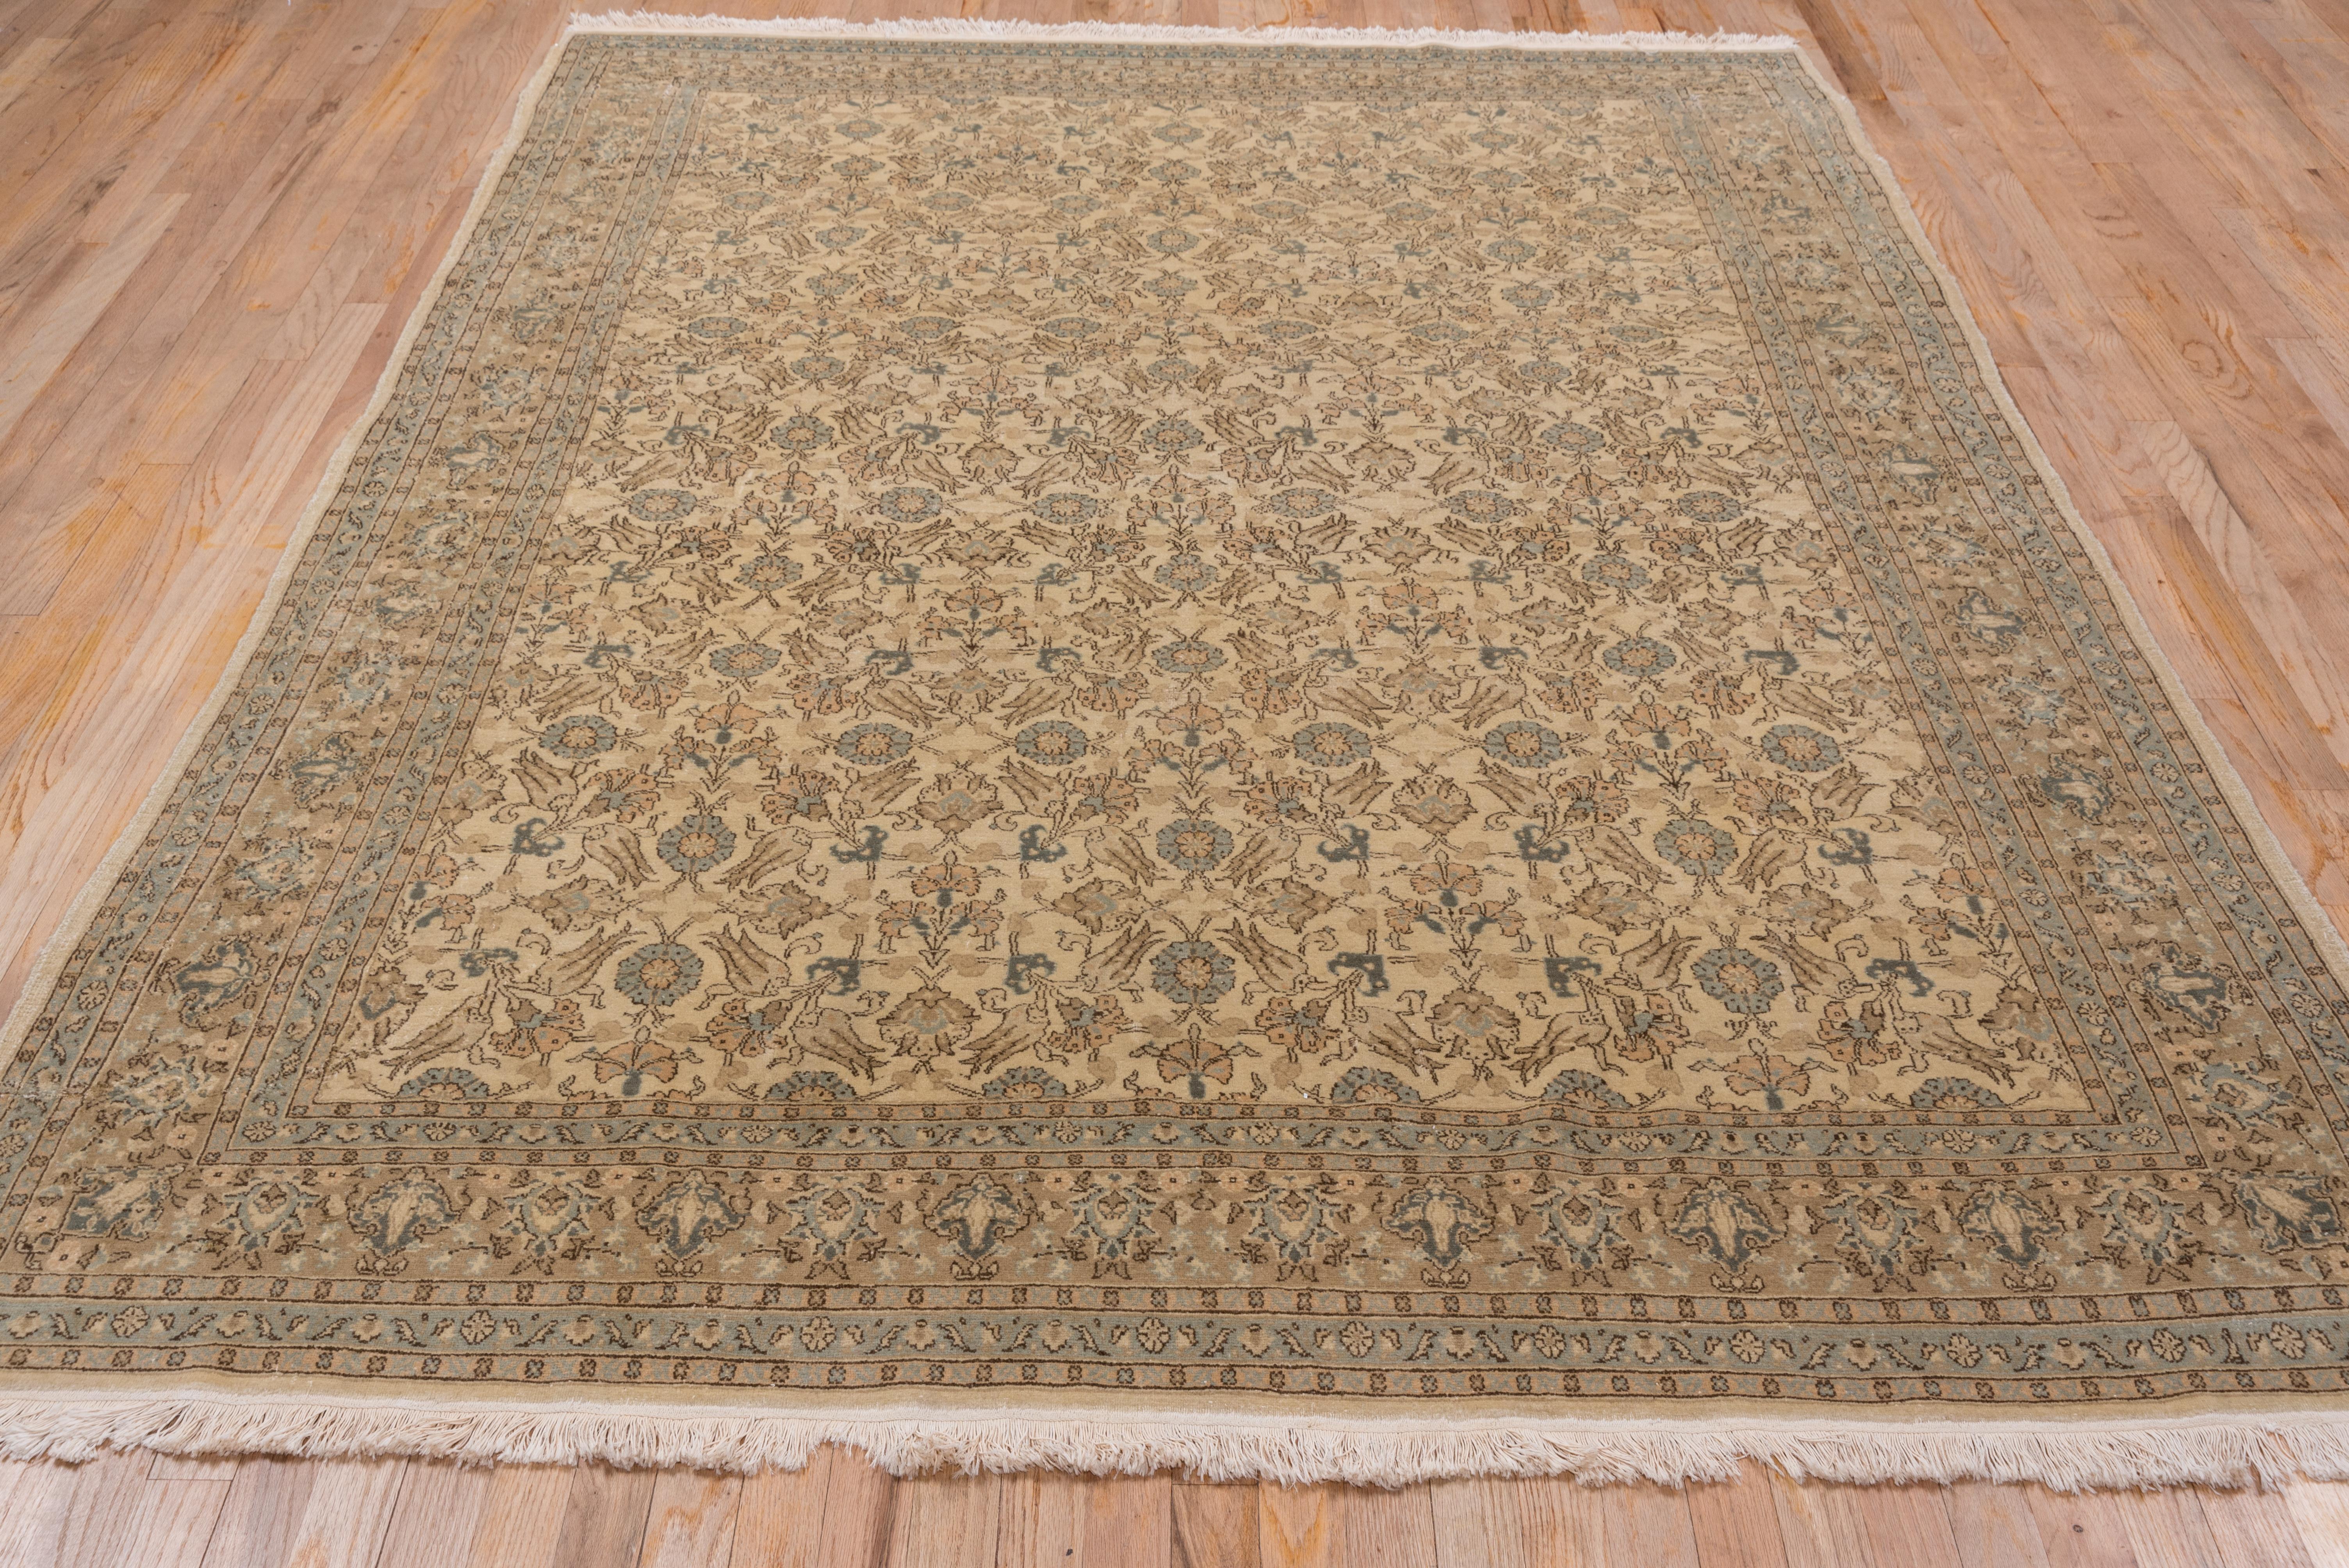 This finely woven eastern Turkish urban rug features a sandy ivory field with an alloer pattern of Ottoman-style tulips and carnations along with arabesques, rosettes and palmettes in dark brown, green and buff. The buff main border shows two types